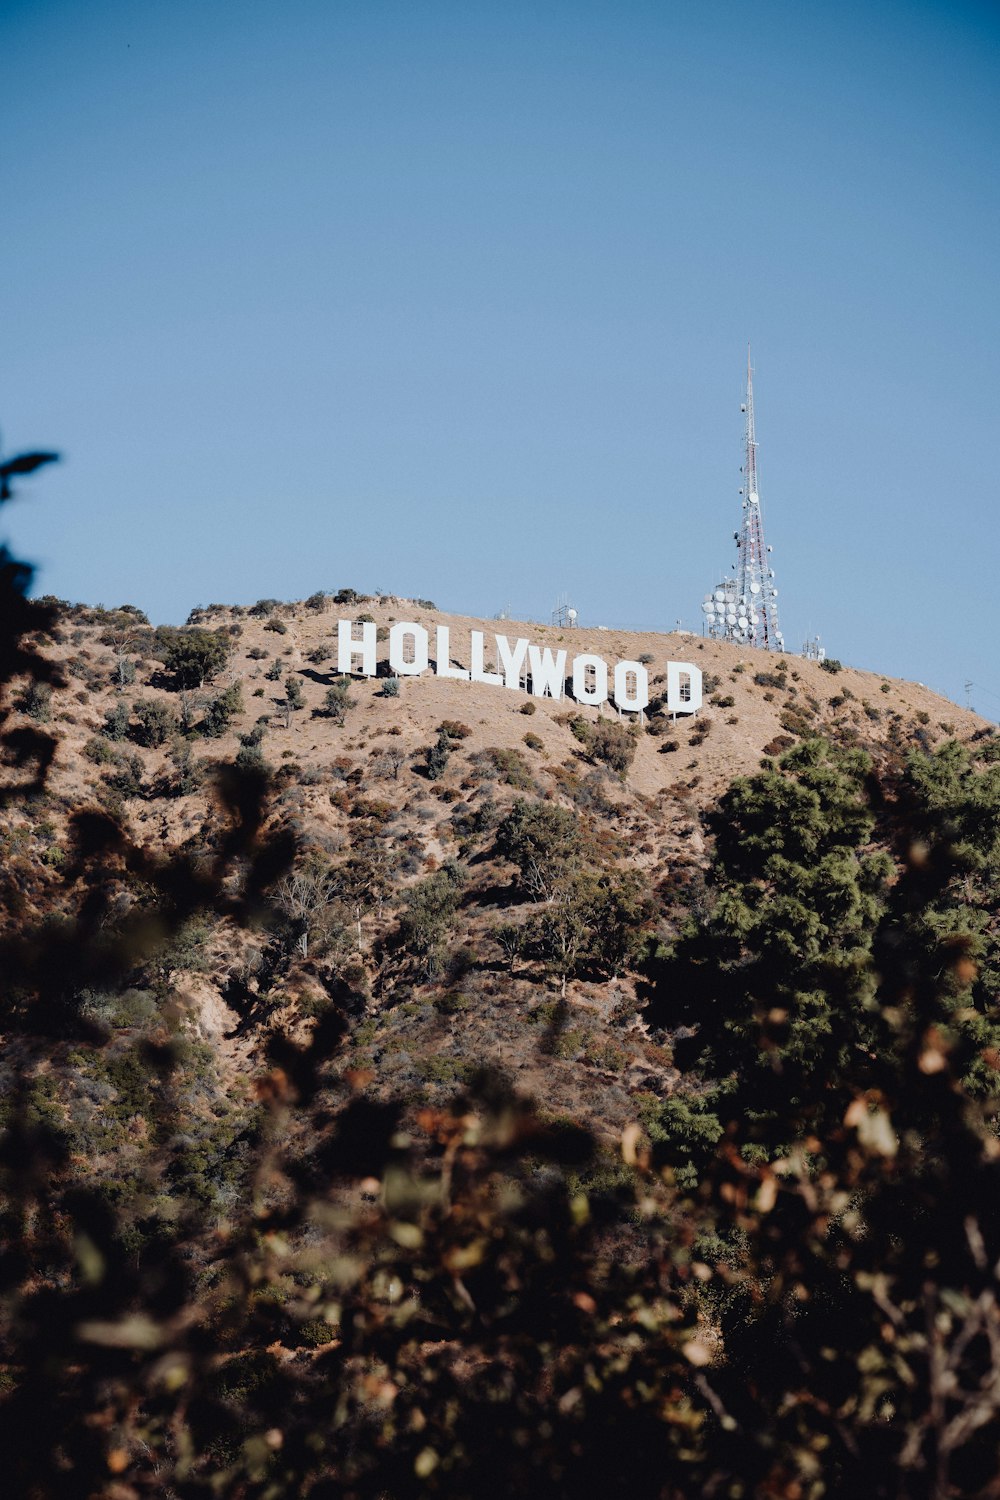 the hollywood sign is on top of a hill